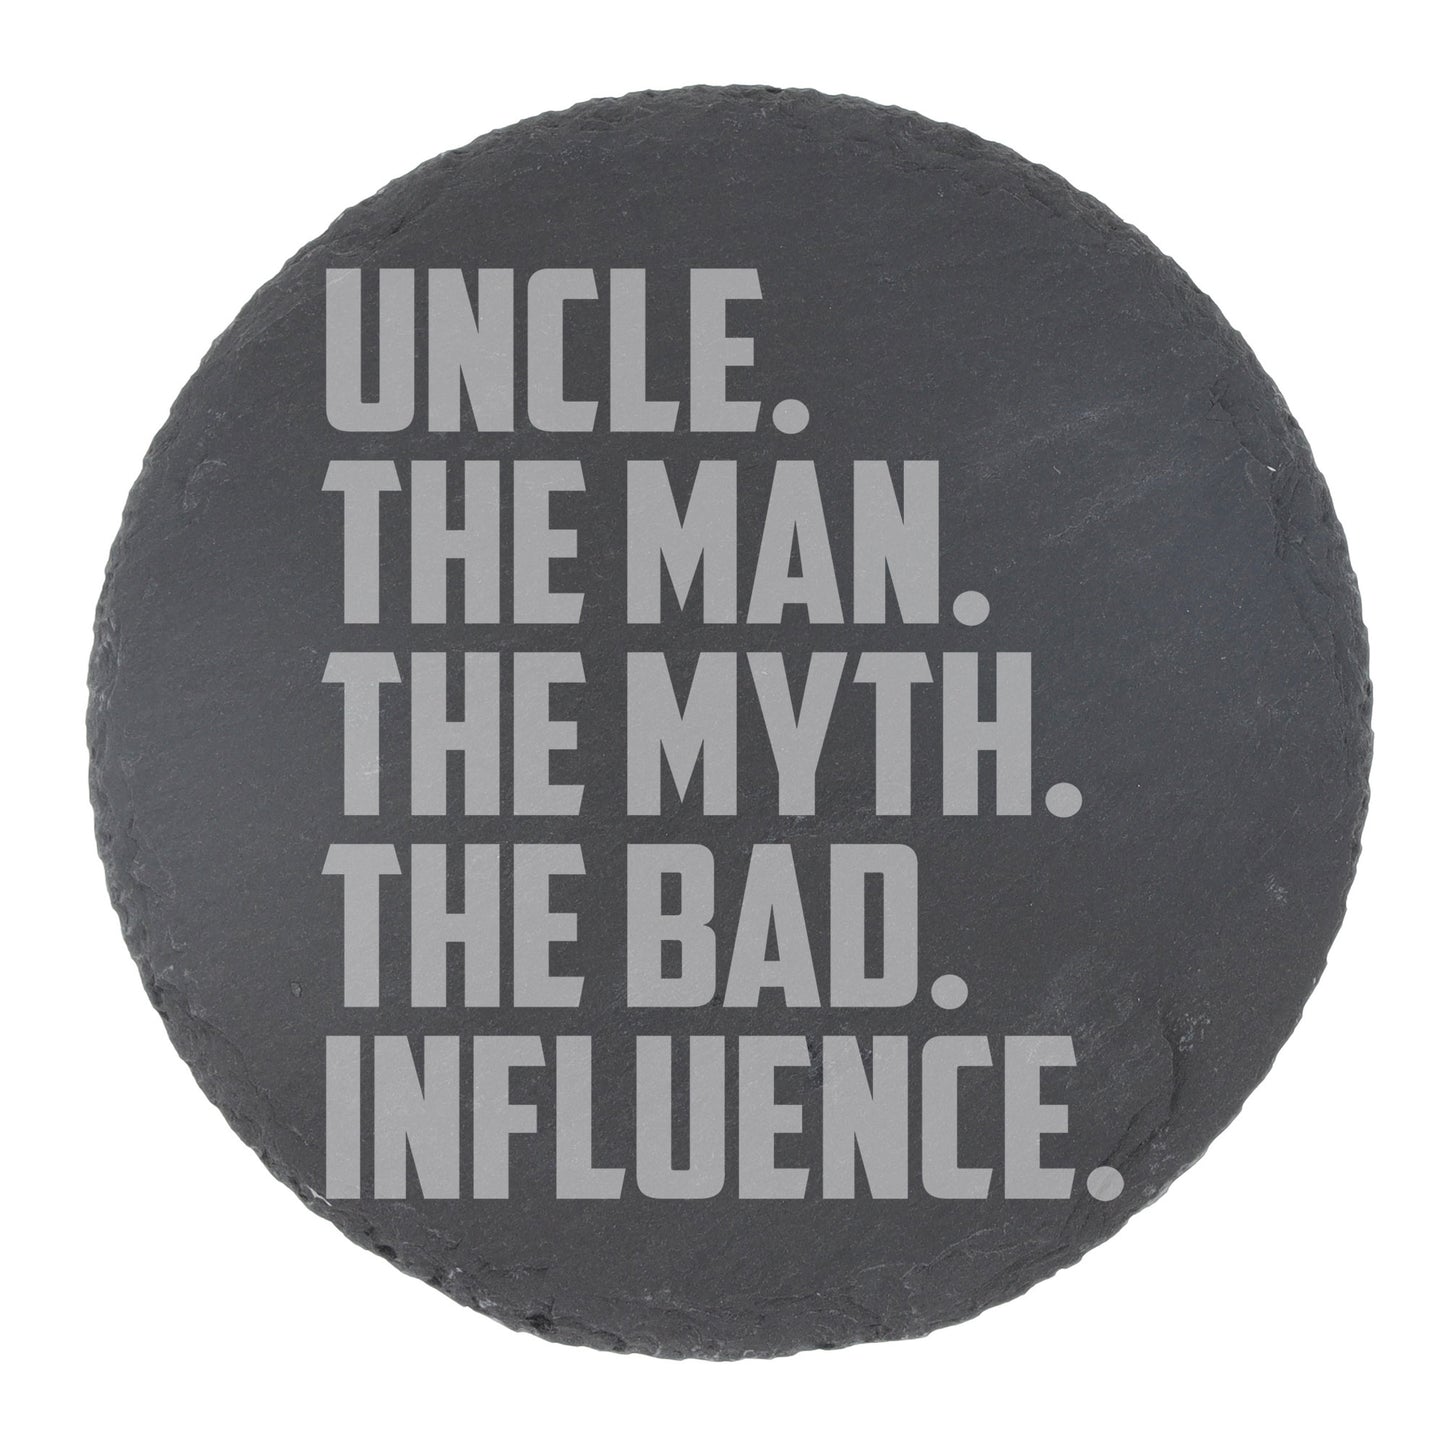 Uncle, The Man, The Myth, The Bad Influence Engraved Beer Glass and/or Coaster Set  - Always Looking Good - Round Coaster Only  